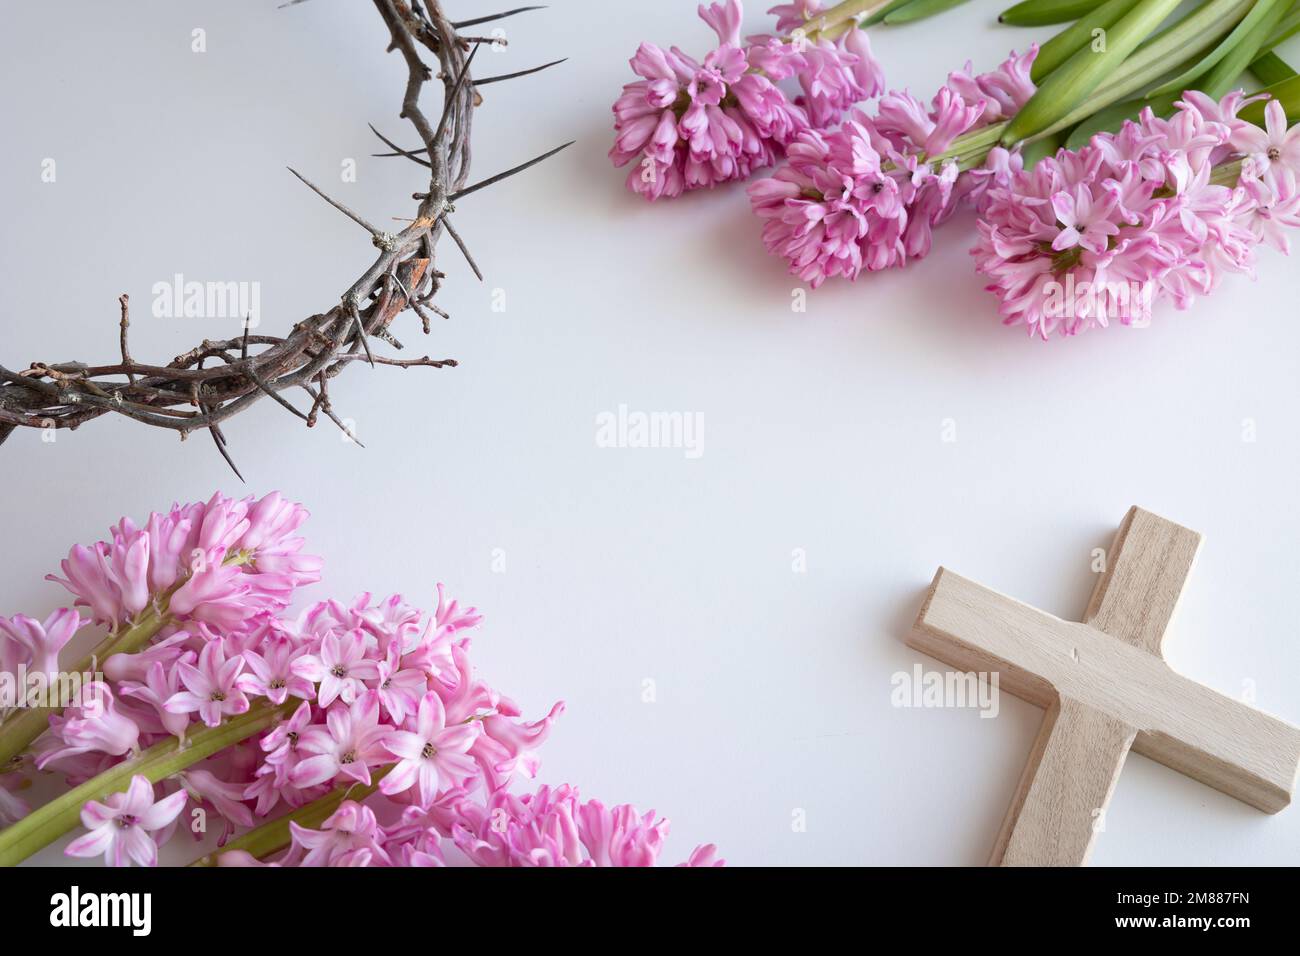 Simple wood cross and crown of thorns with pink hyacinth flowers on a white background with copy space Stock Photo